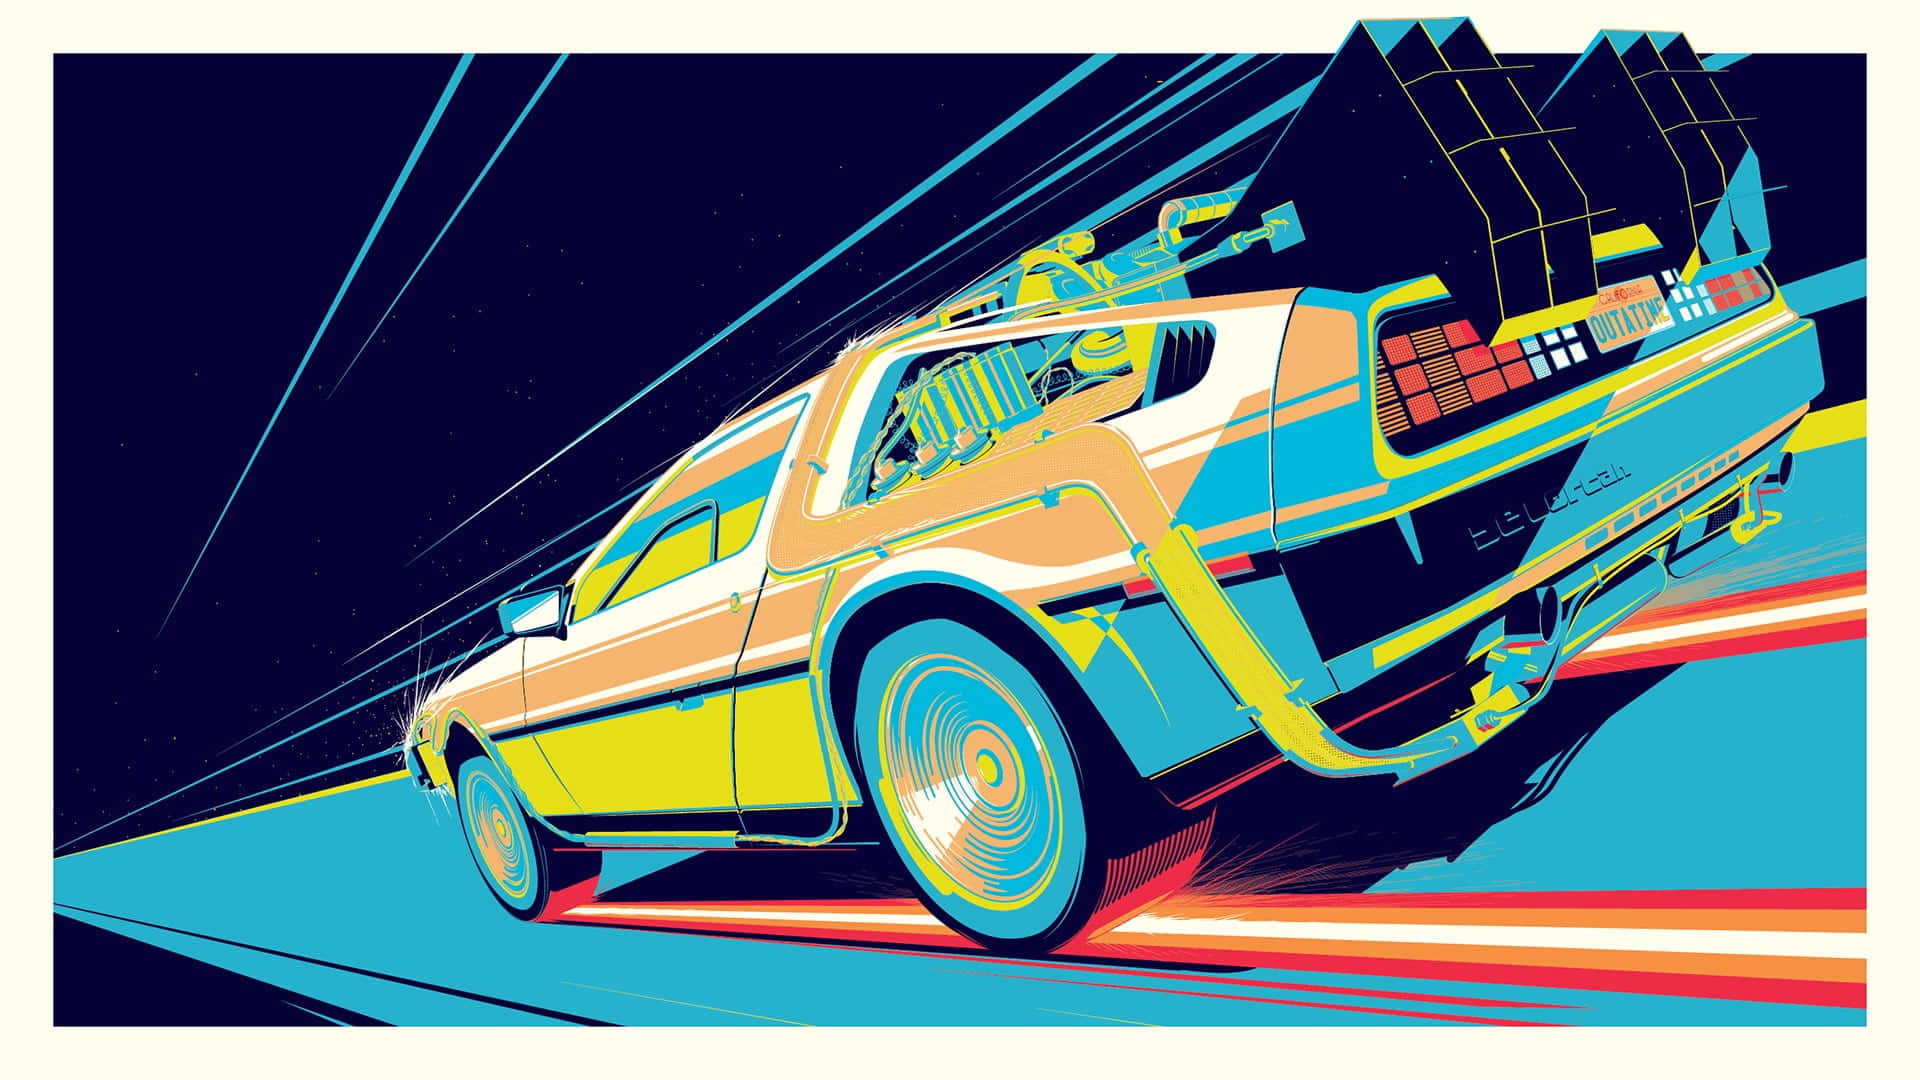 Marty McFly travels back in time with Doc—Back To The Future